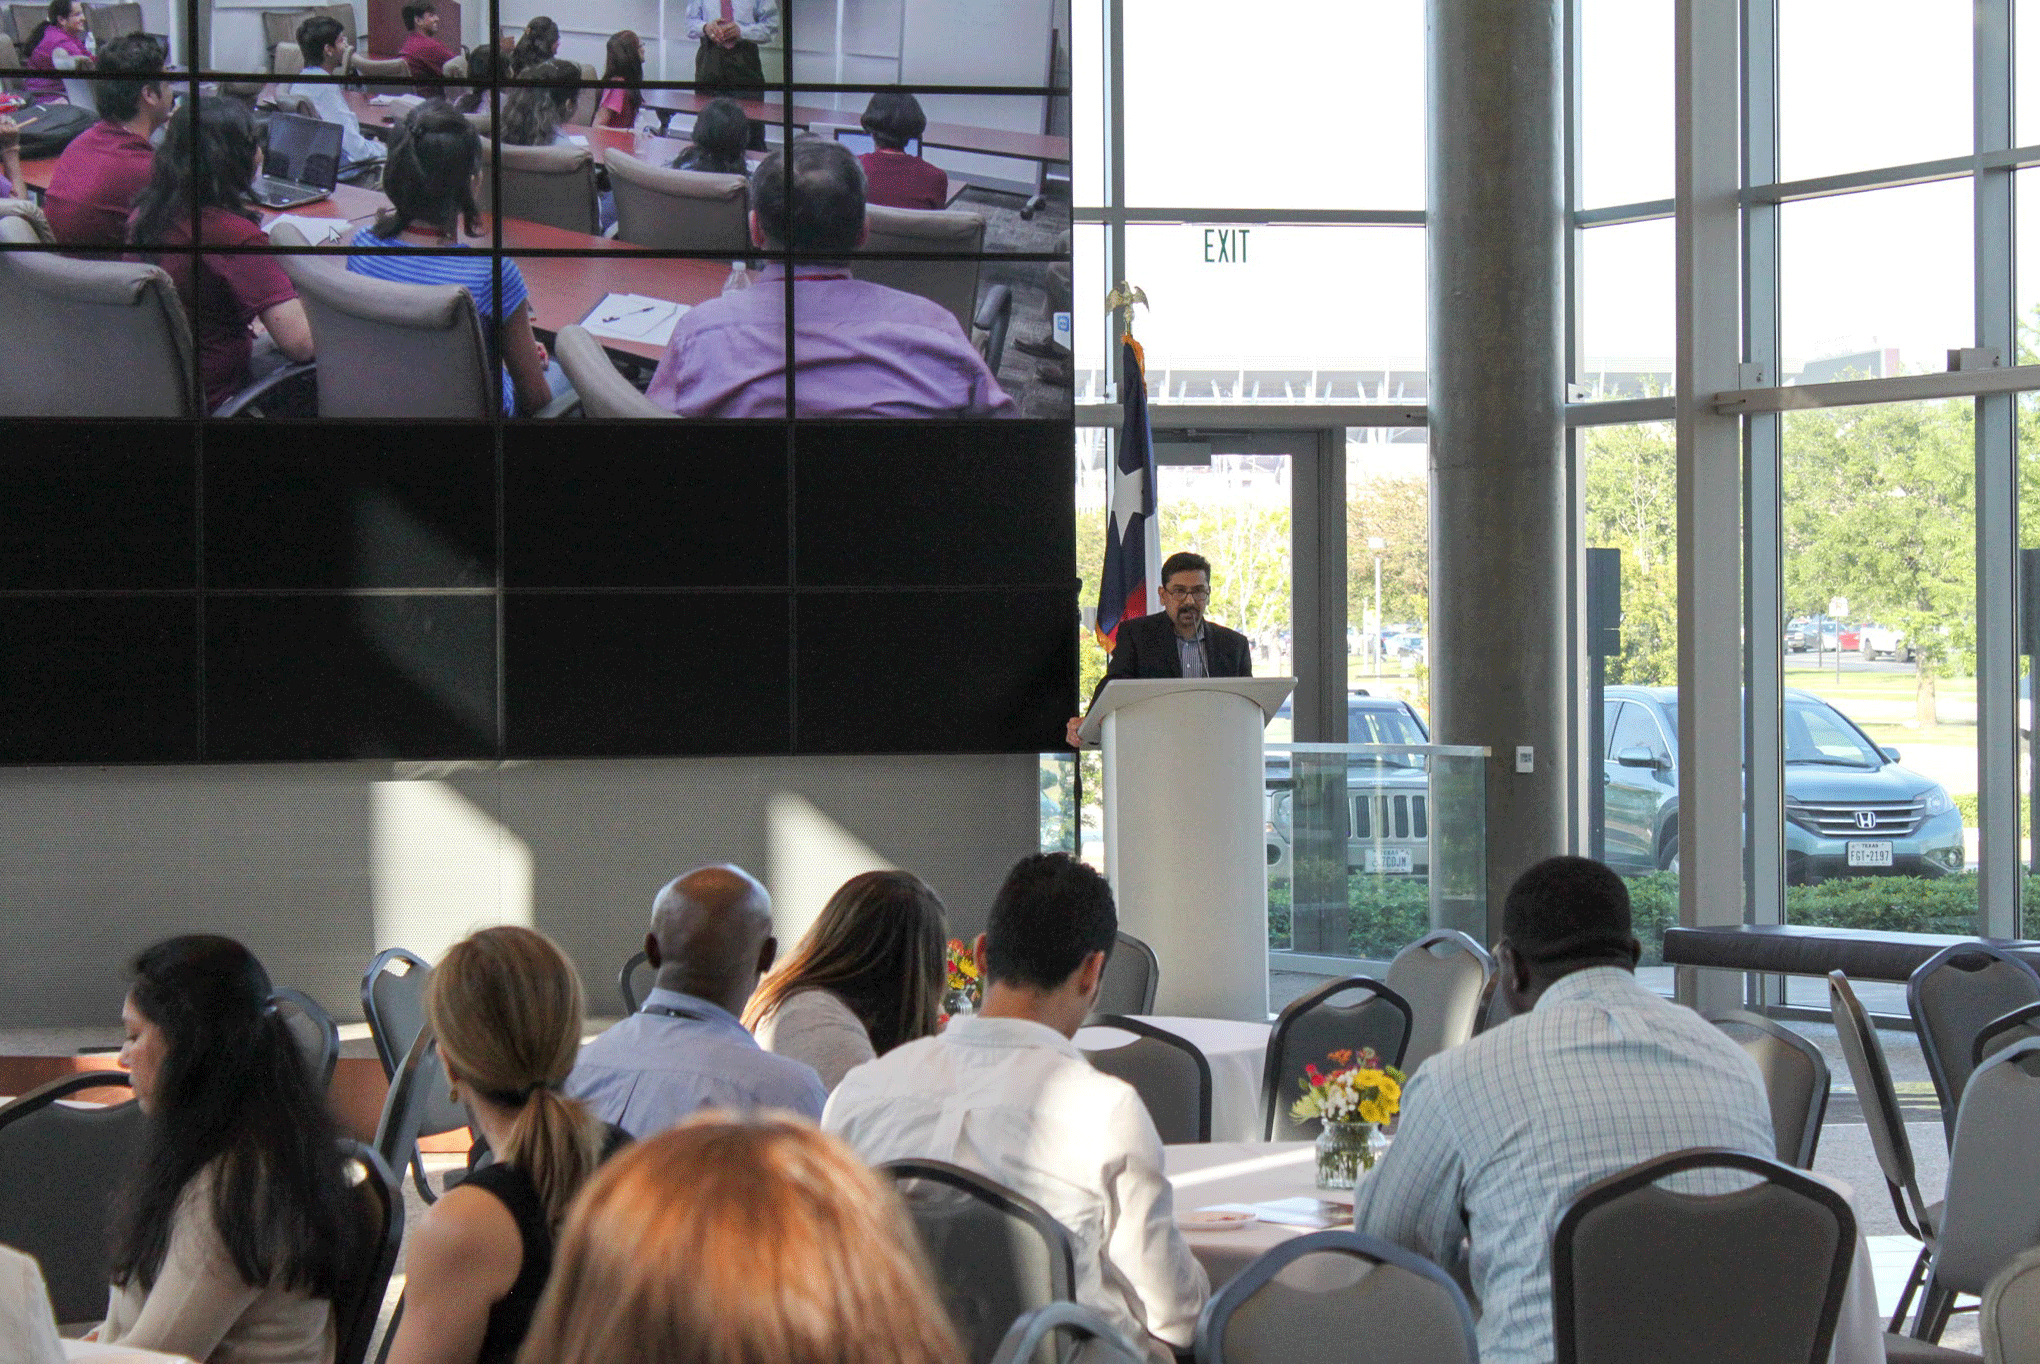 The Nuclear Security Science and Policy Institute Representative Giving A Speech In Front of An Audience